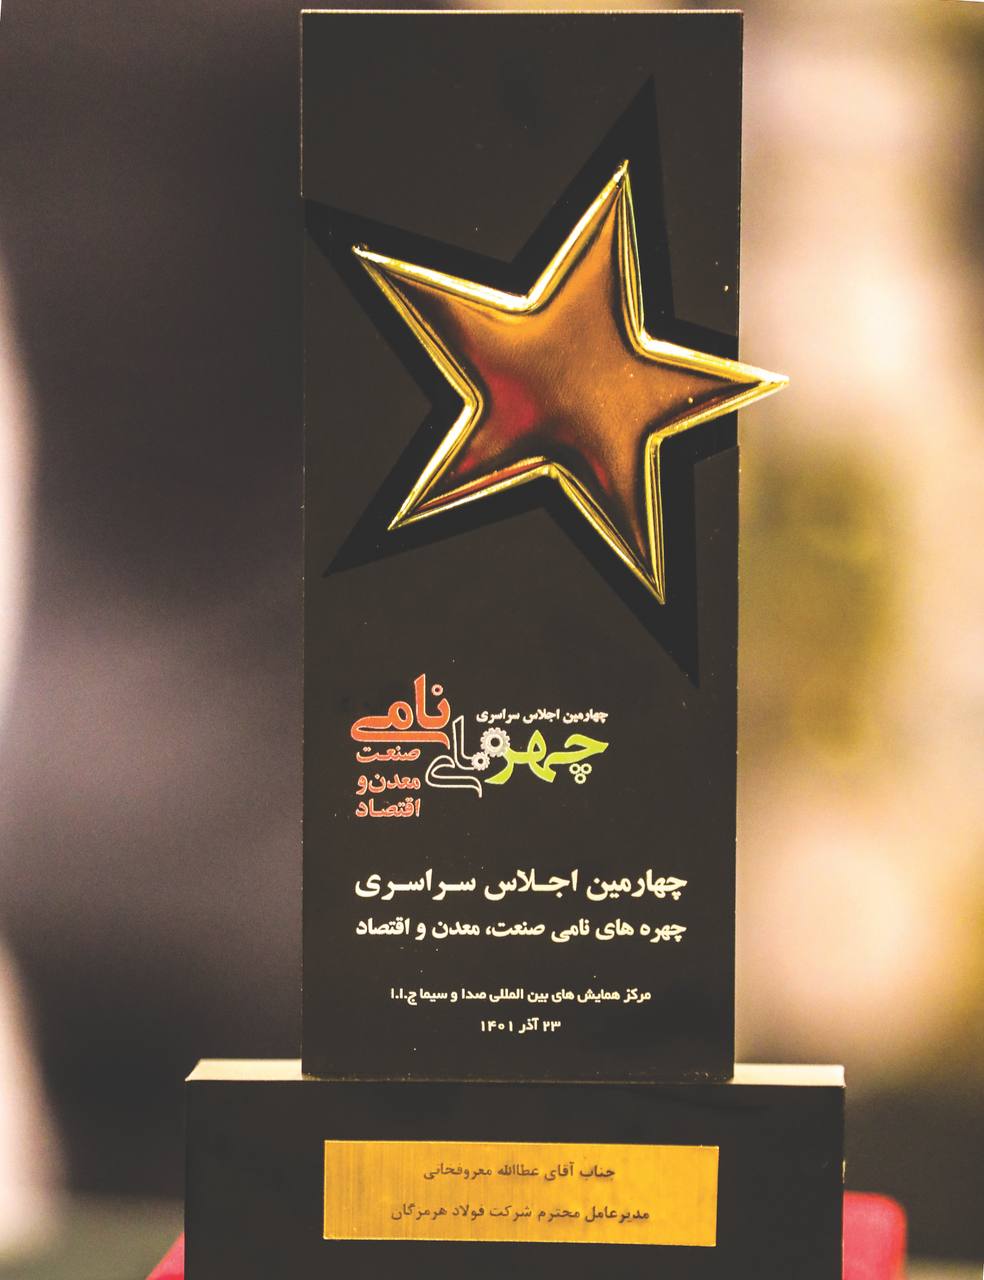 The CEO of Hormozgan Steel was honored as a renowned figure of the industry